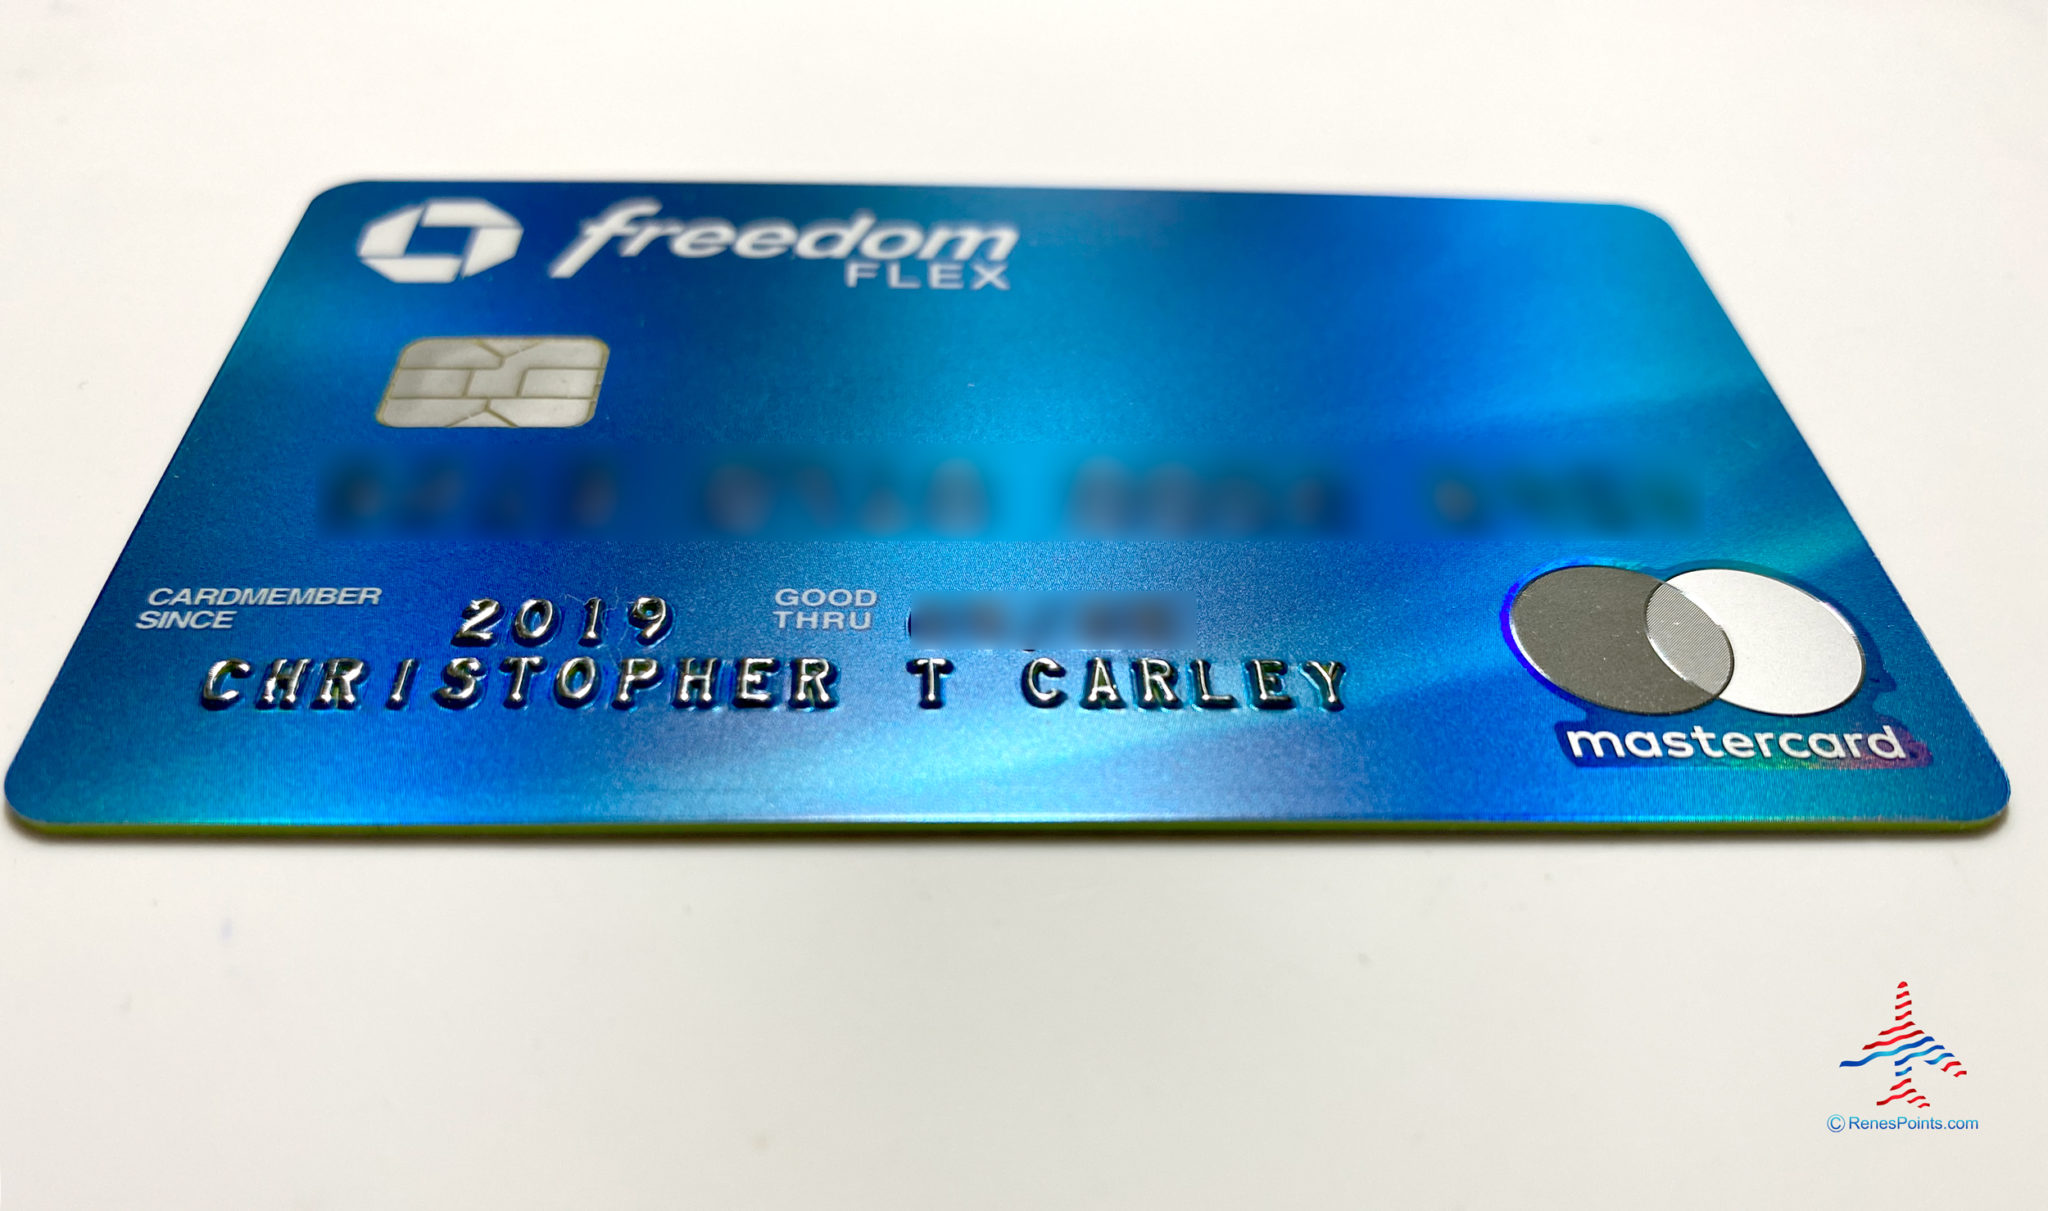 our-first-look-chase-freedom-flex-mastercard-eye-of-the-flyer